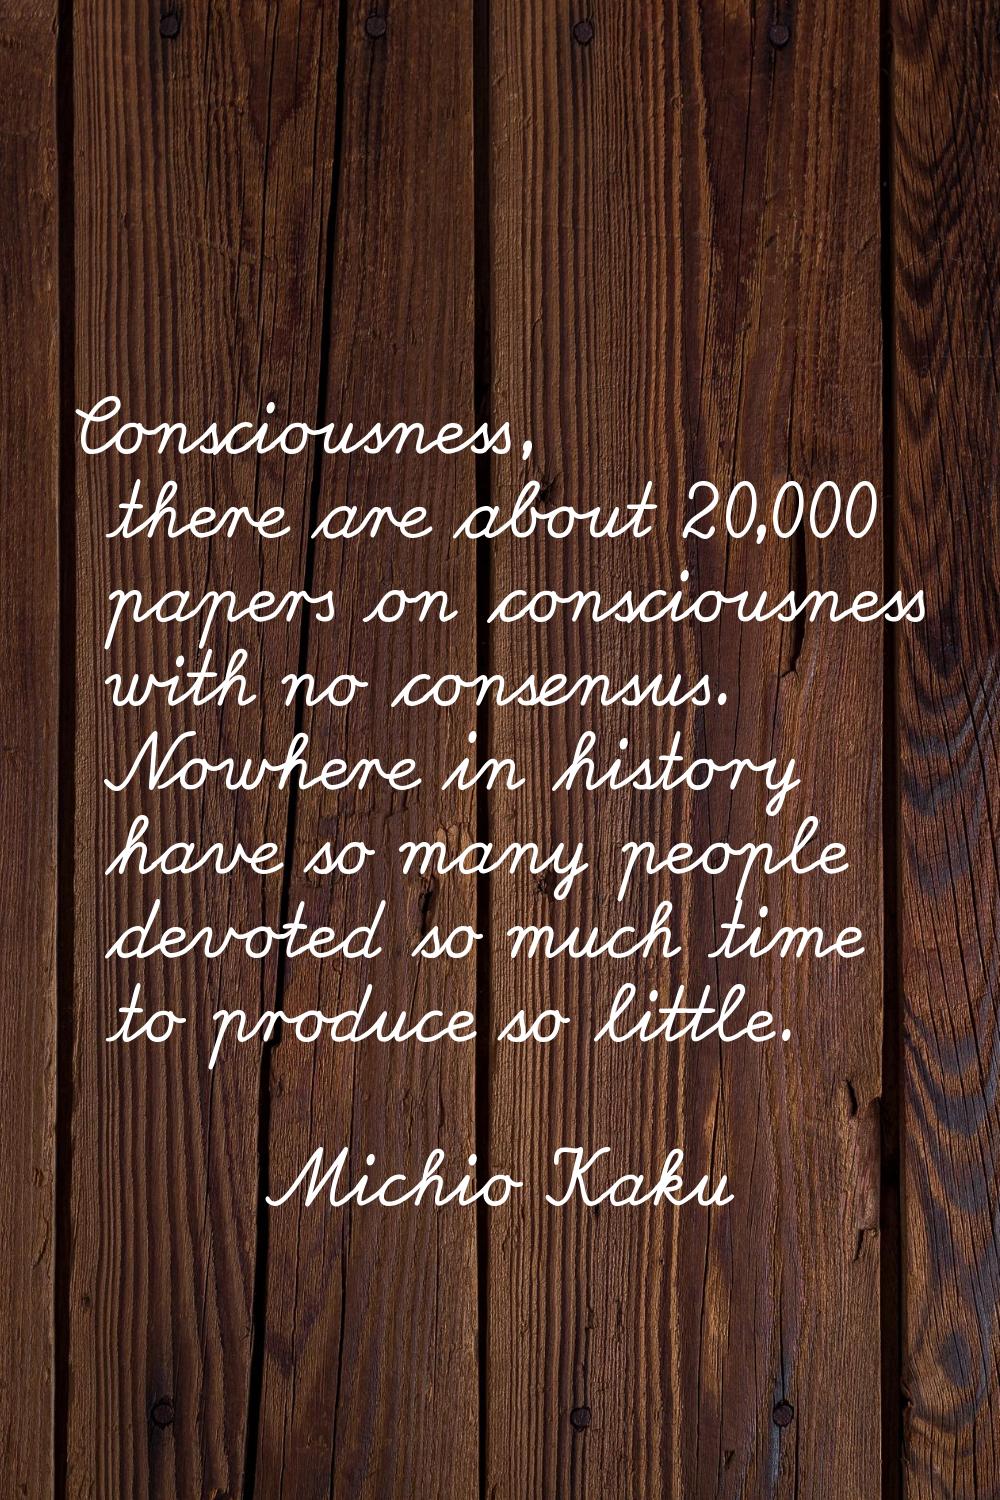 Consciousness, there are about 20,000 papers on consciousness with no consensus. Nowhere in history